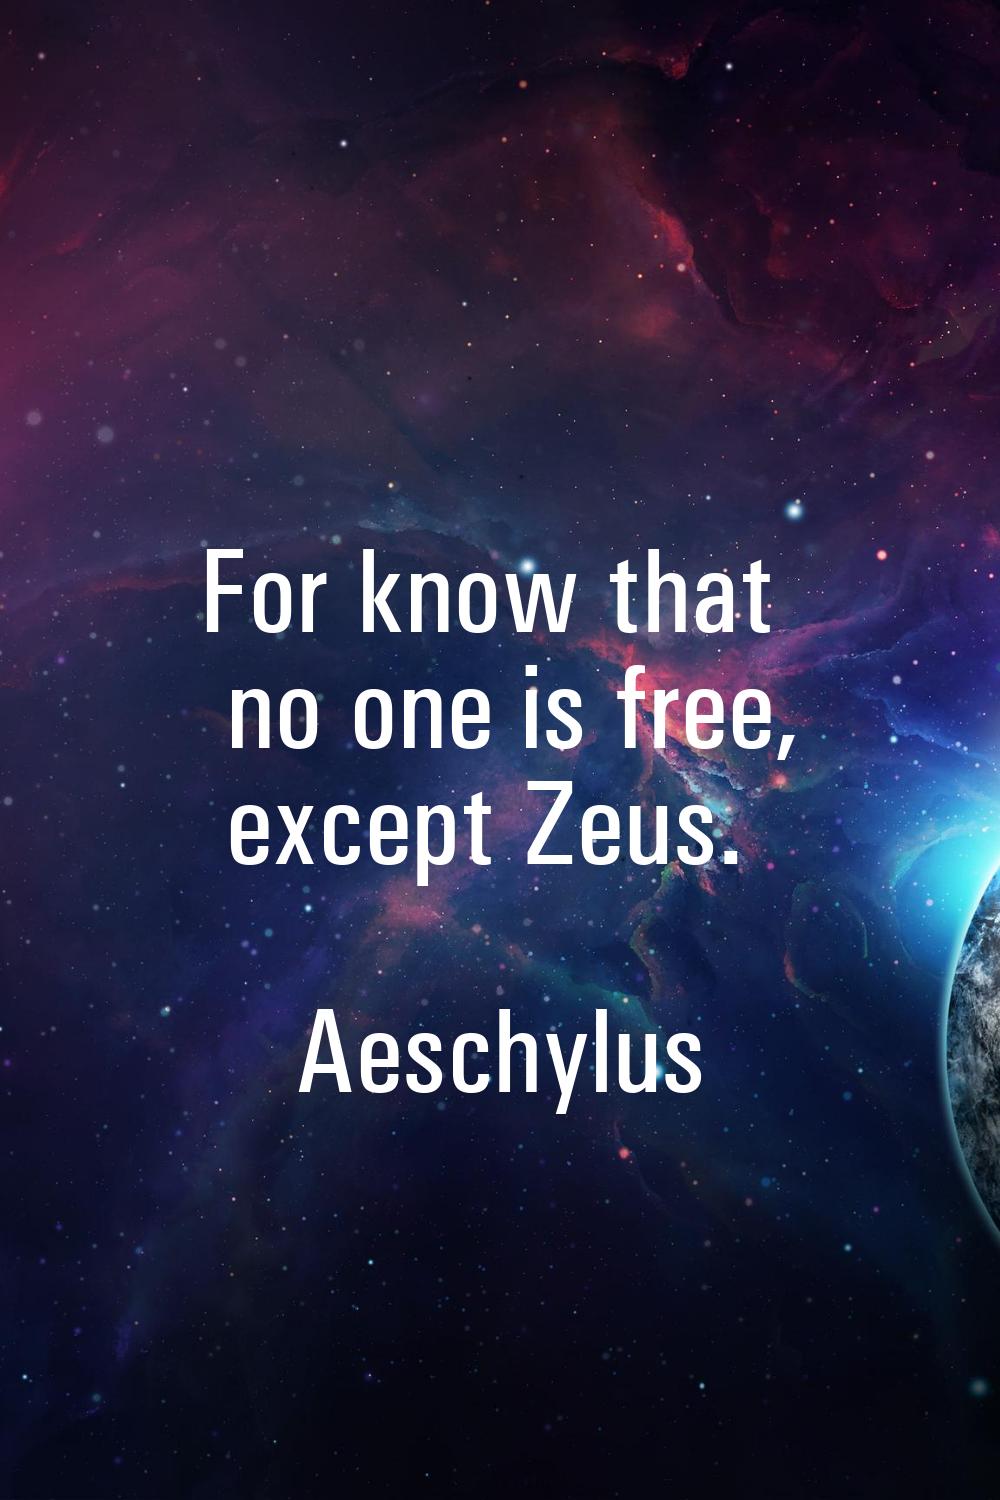 For know that no one is free, except Zeus.